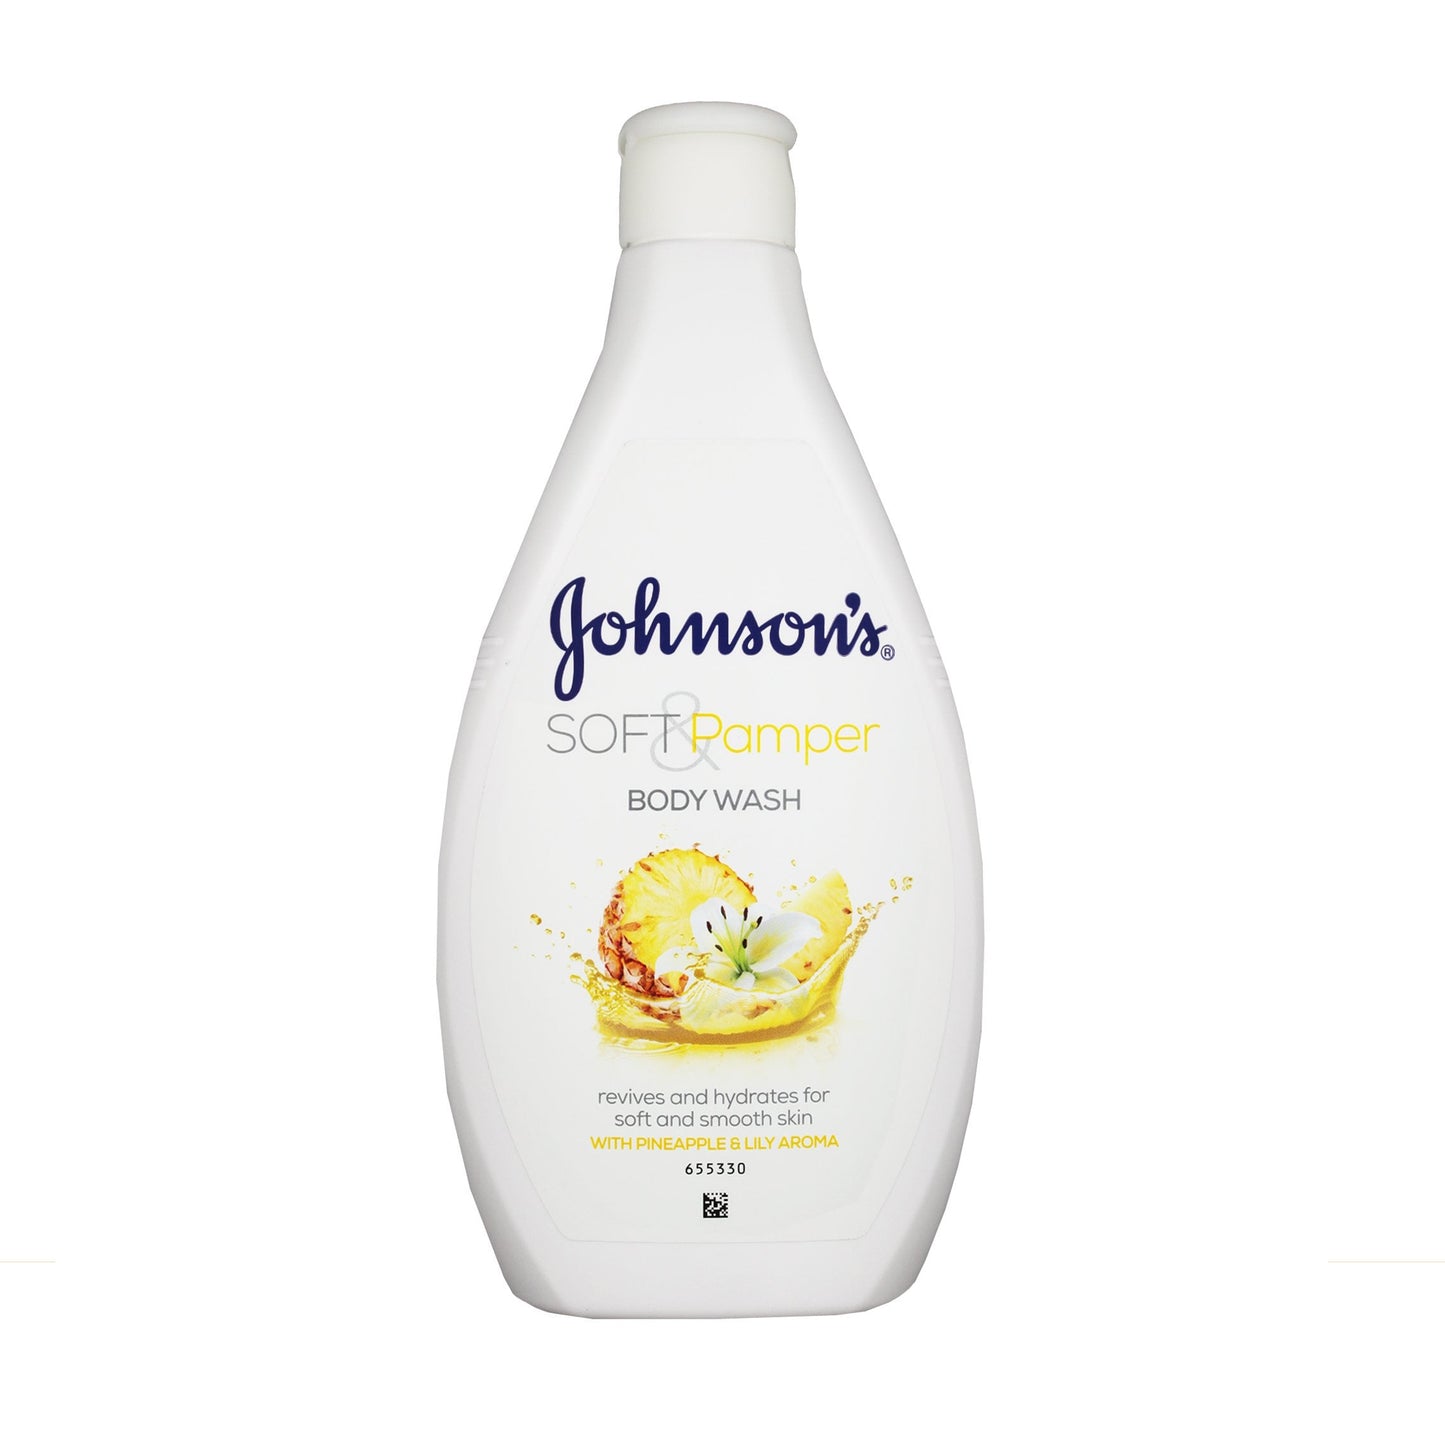 JOHNSON'S - SOFT & PAMPER BODY WASH WITH PINEAPPLE & LILLY AROMA - 400ML